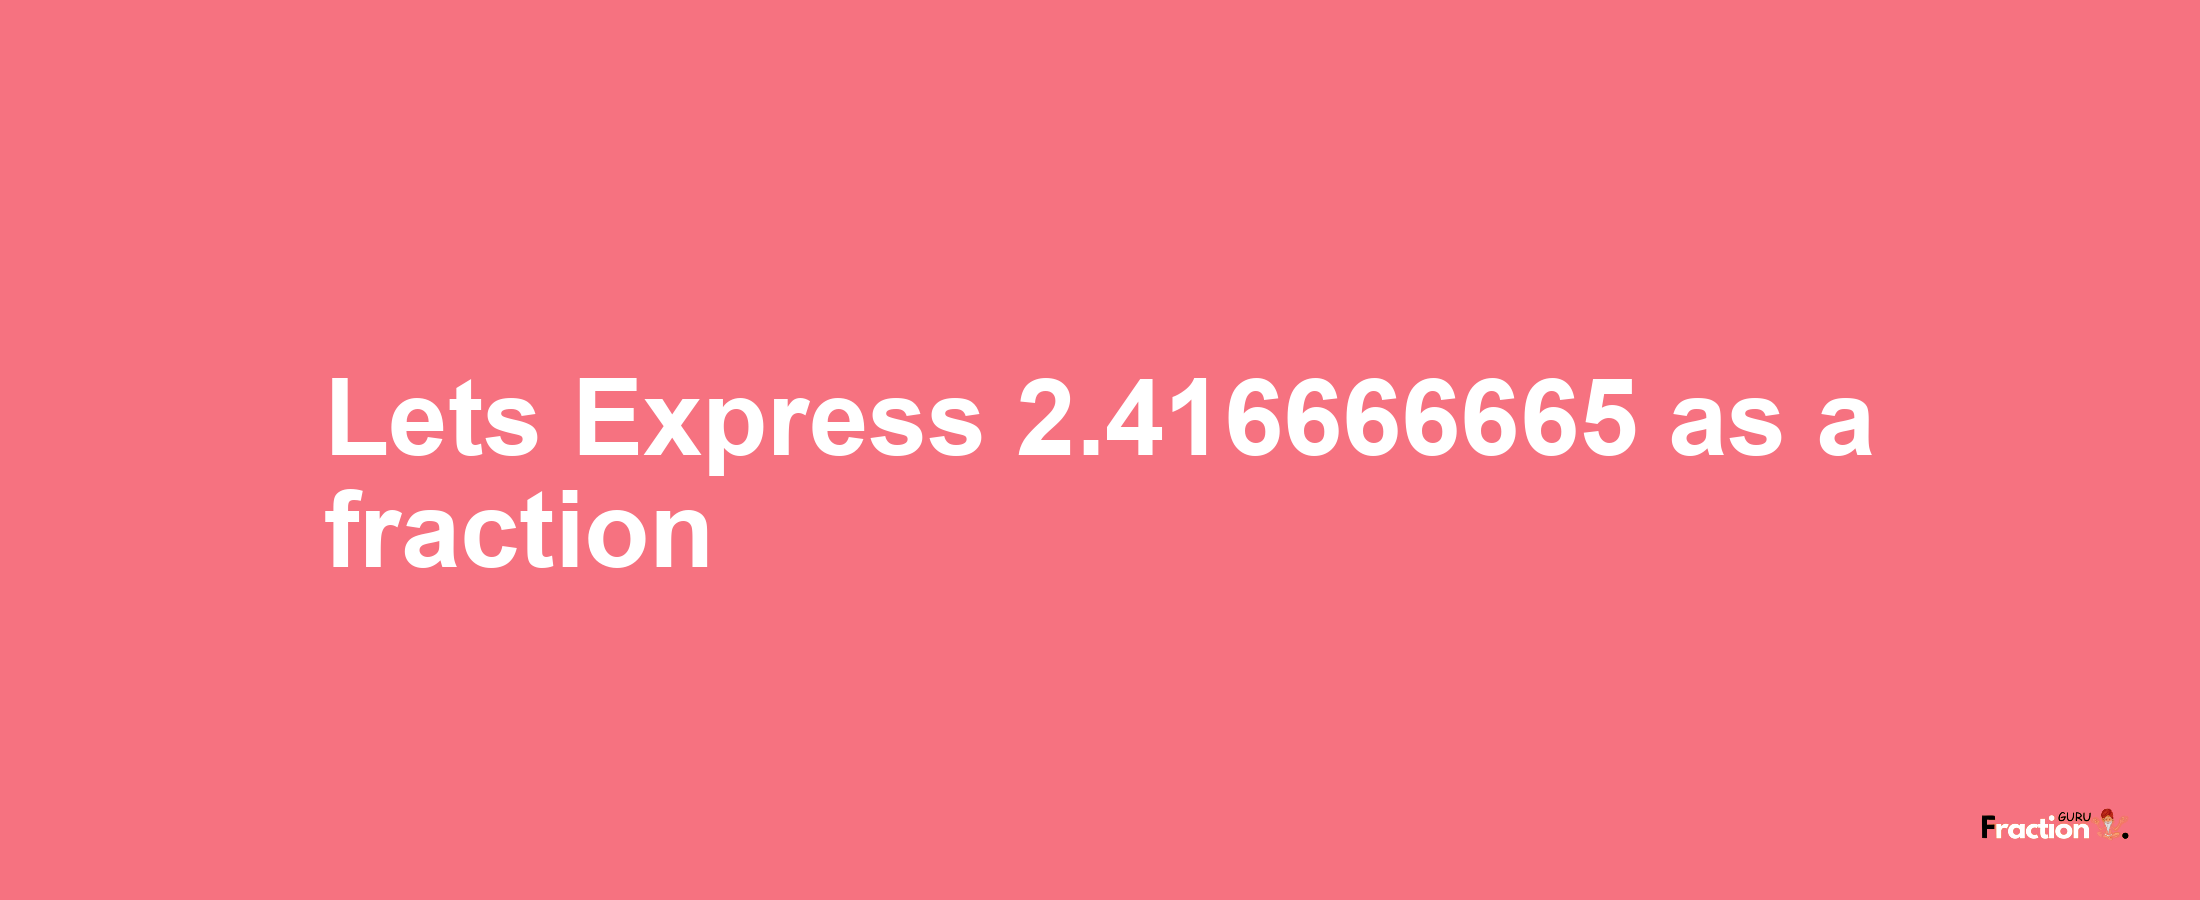 Lets Express 2.416666665 as afraction